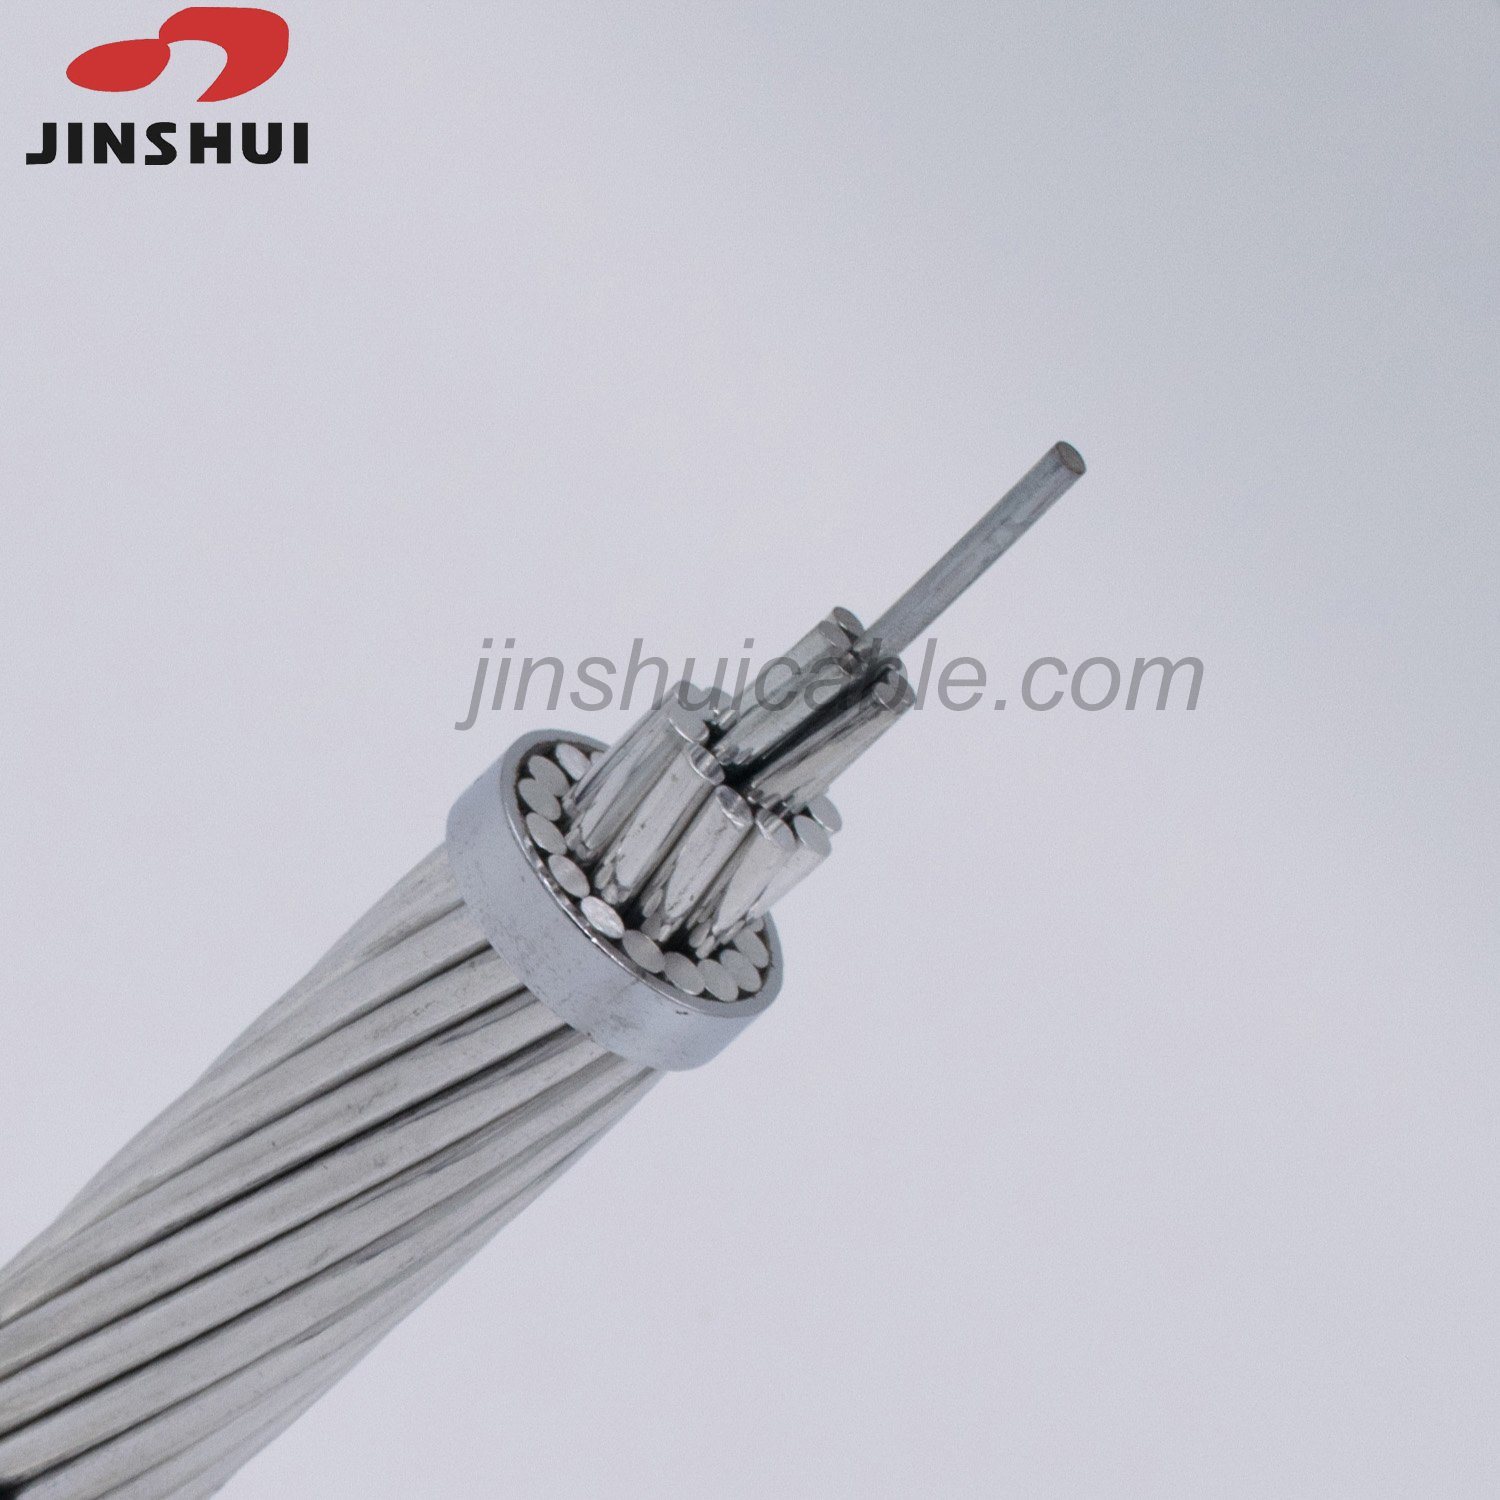 Al. Conductor Overhead Electric Transmission Cable